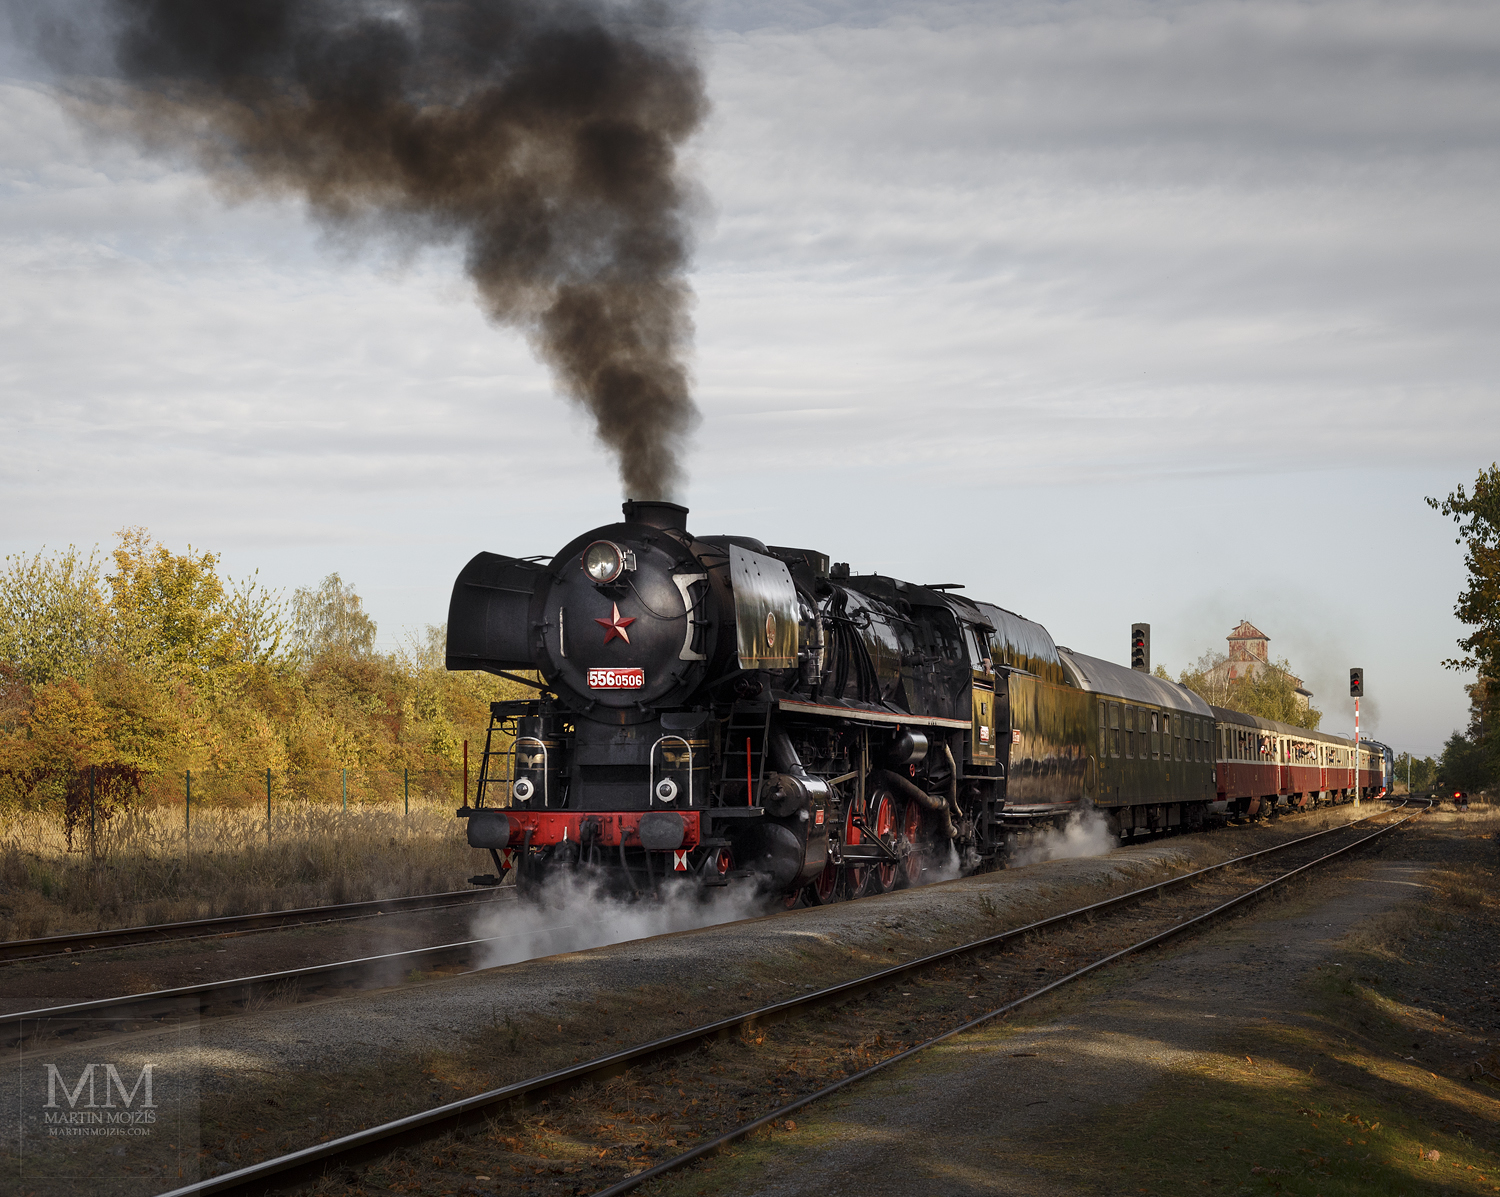 Large format, fine art photograph of steam locomotive on the end of the passenger train. Martin Mojzis.